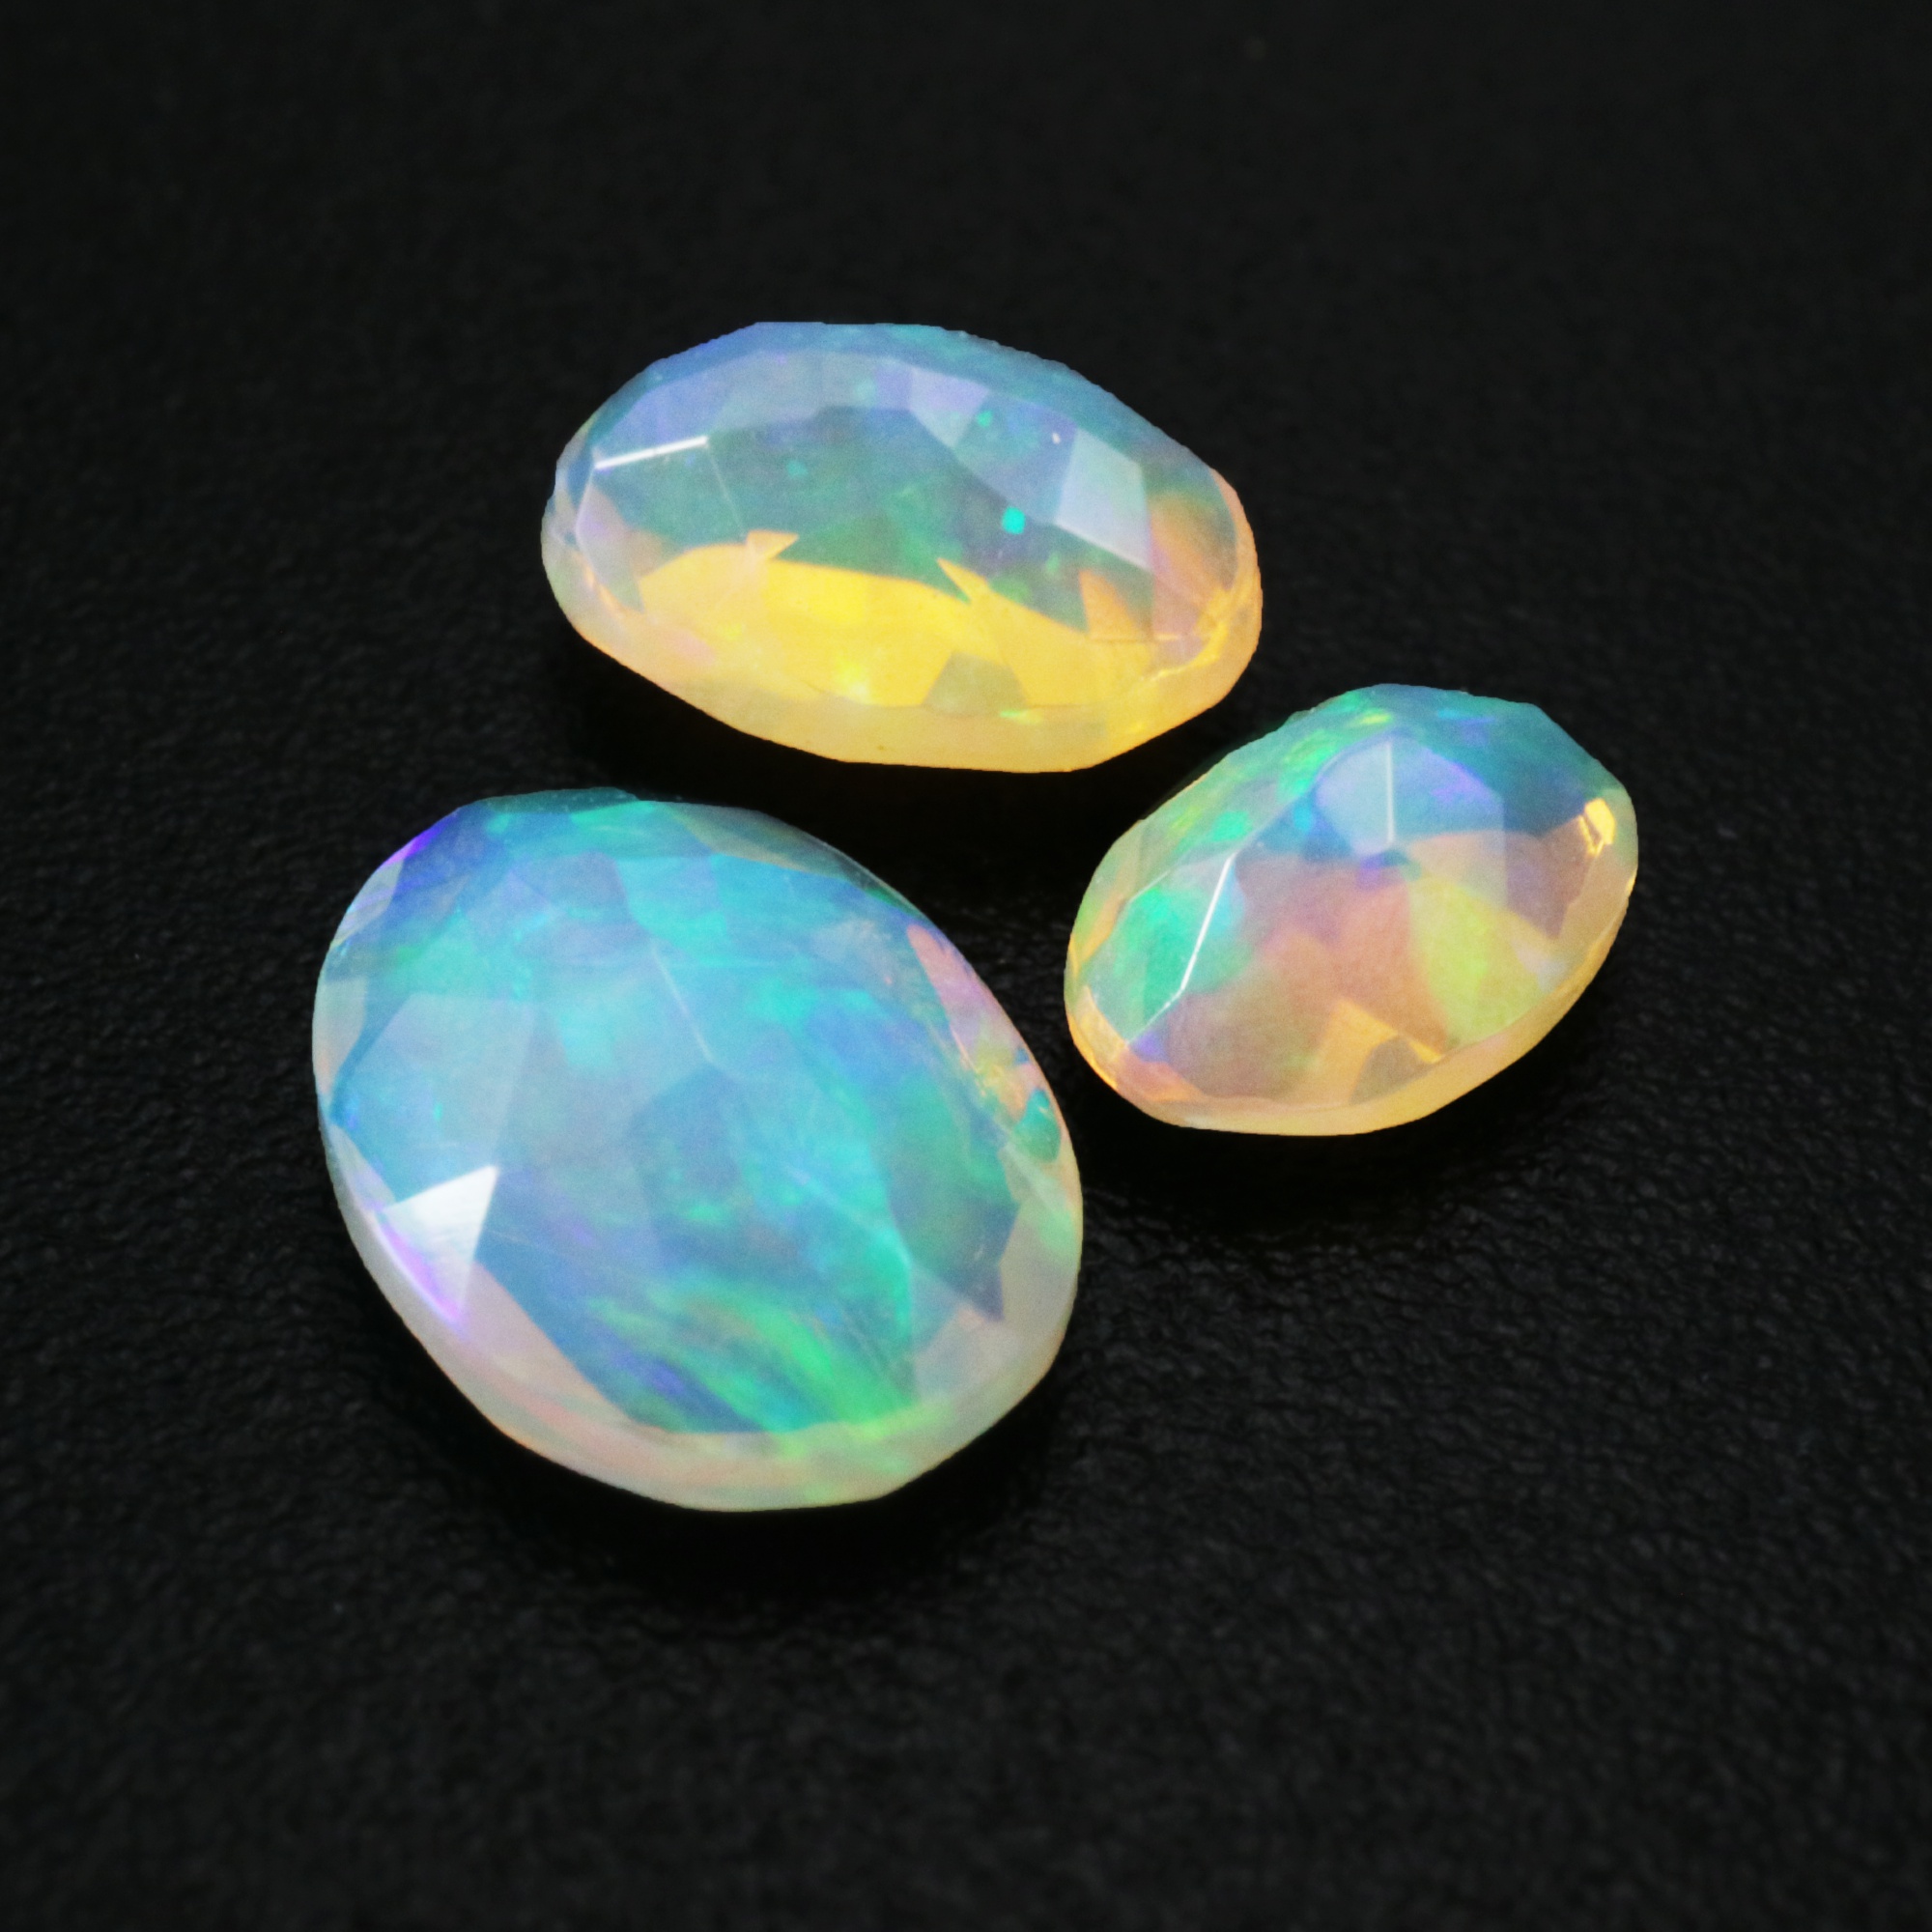 1Pcs Oval Africa Opal October Birthstone Color Changing Faceted Cut AAA Grade Loose Gemstone Natural Semi Precious Stone DIY Jewelry Supplies 4120133 - Click Image to Close